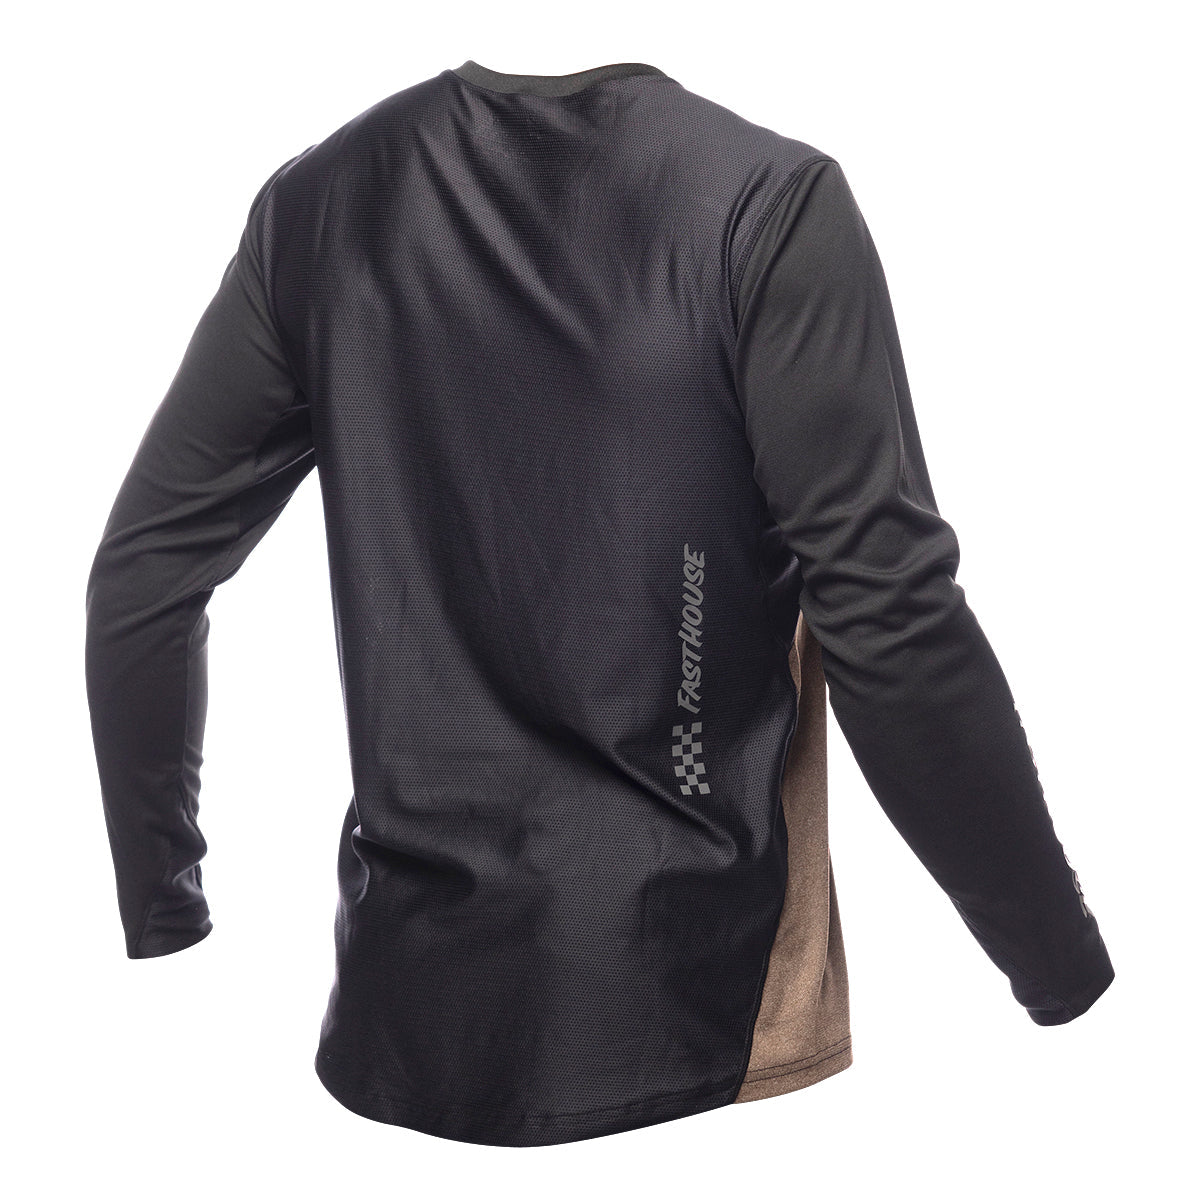 Alloy Mesa Long Sleeve Jersey - Heather Gold/Brown